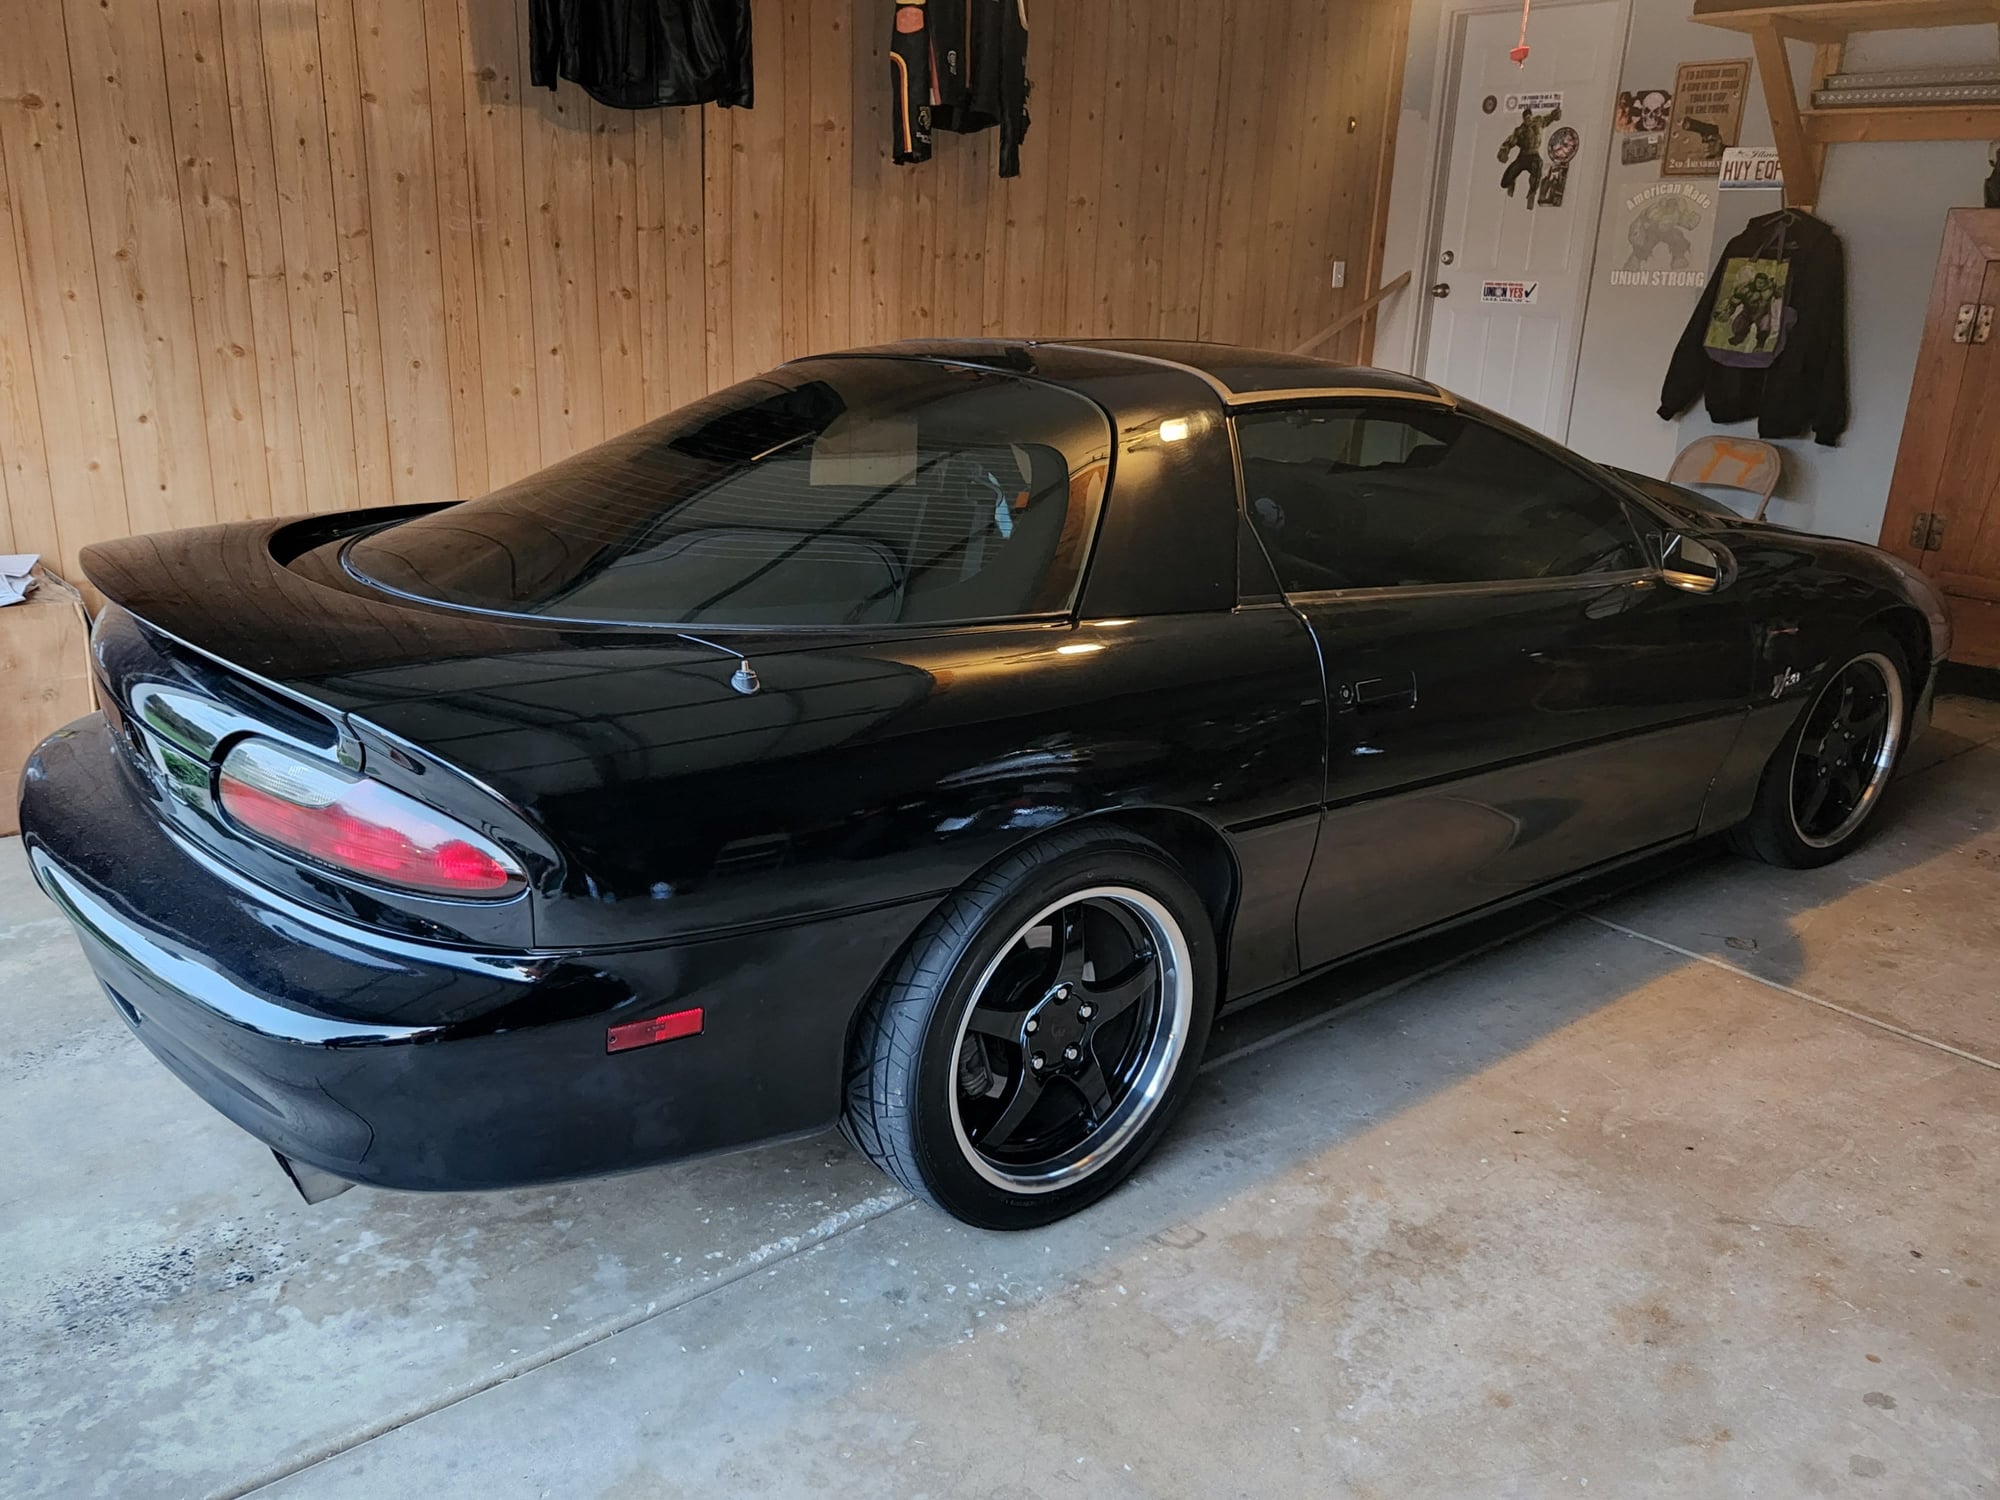 2004 Chevrolet Classic - Supercharged z28,lots of mods - Used - VIN 2g1fp22p4r2129312 - 80,000 Miles - 8 cyl - Manual - Coupe - Black - Joliet, IL 60435, United States